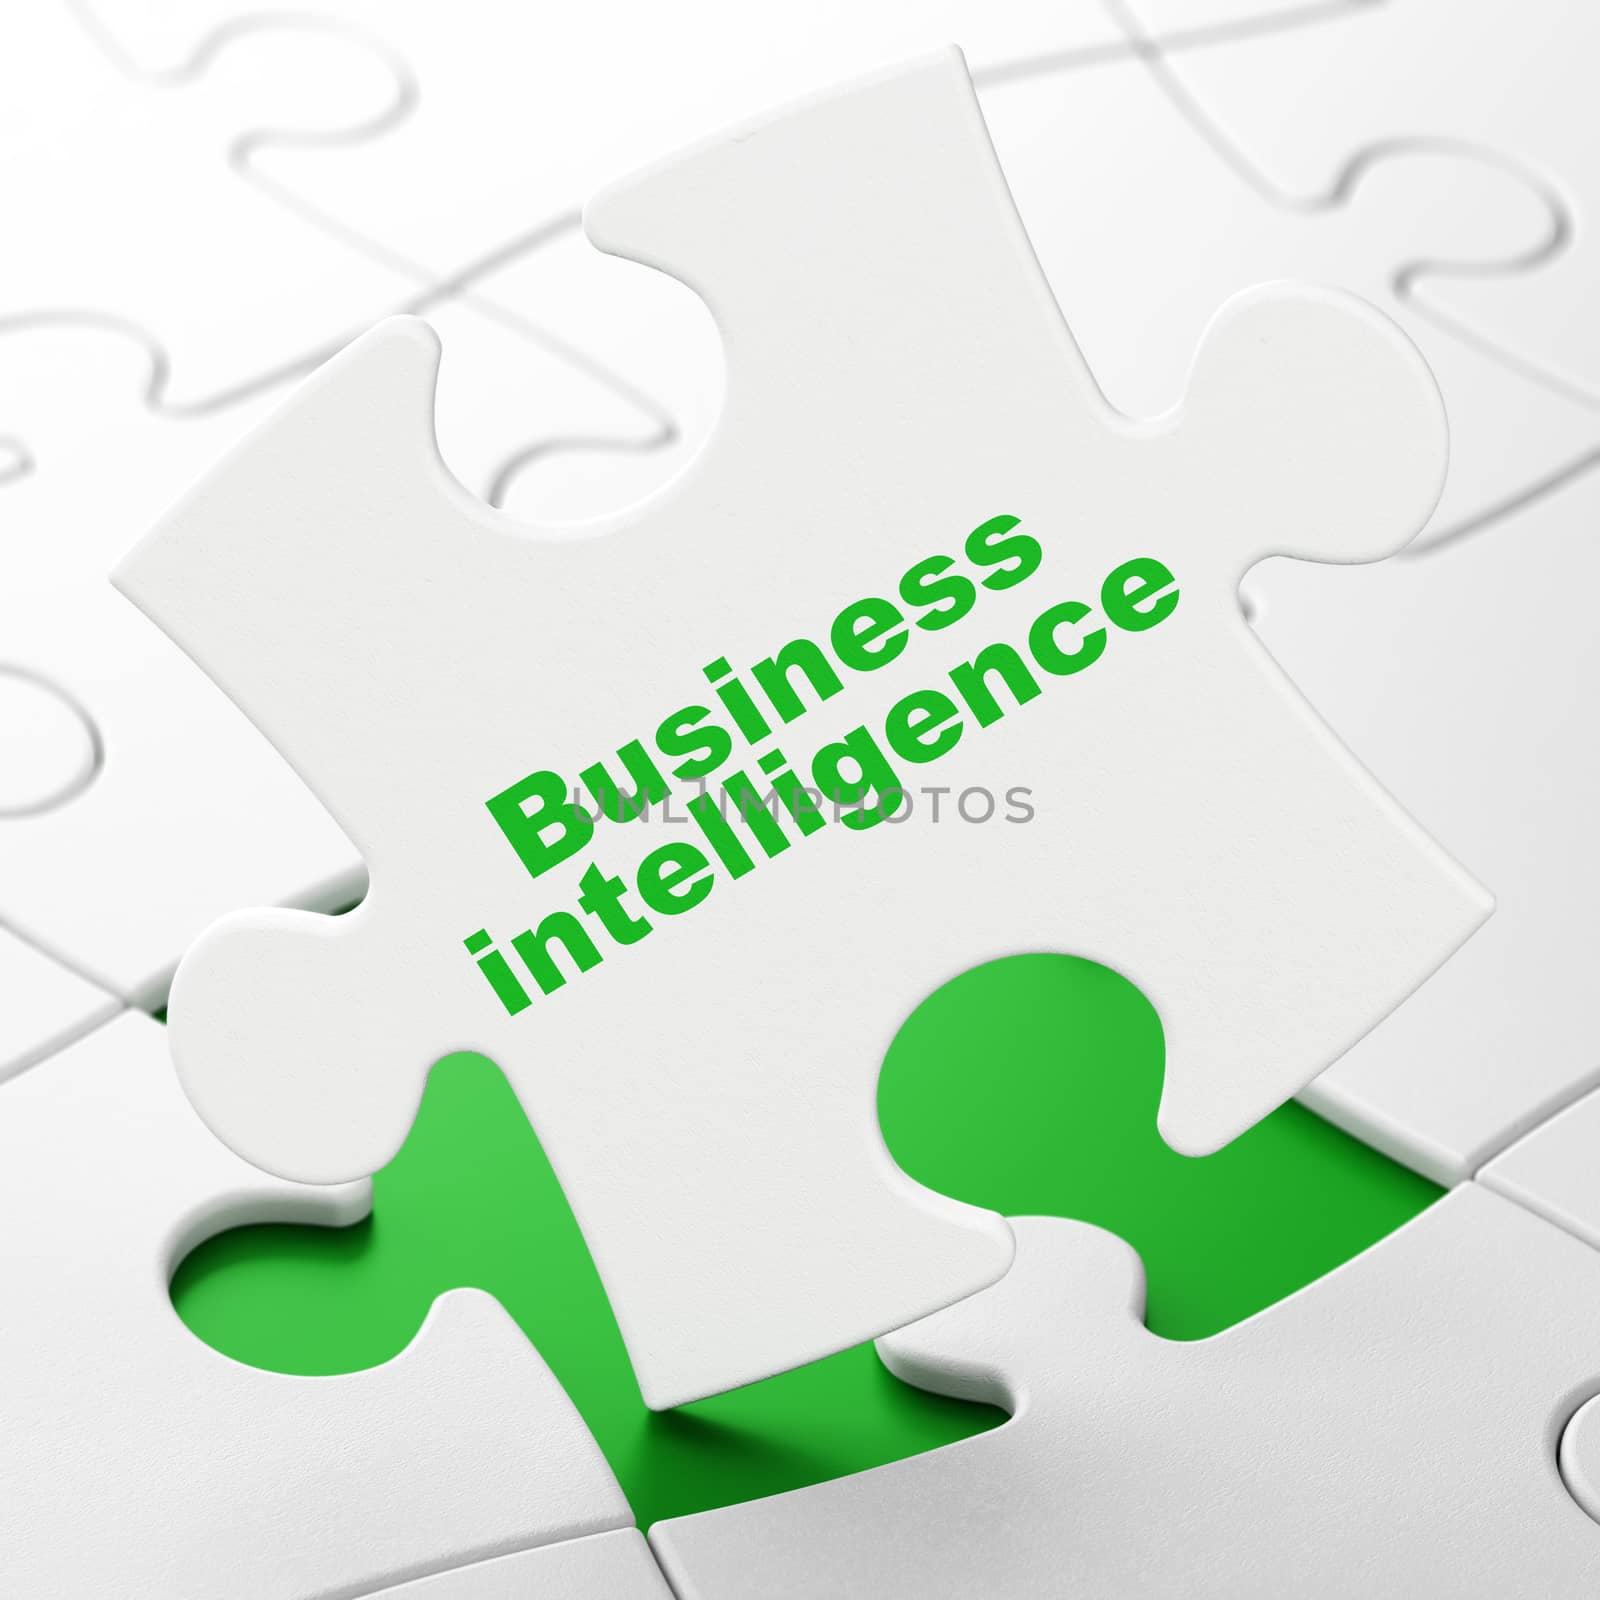 Finance concept: Business Intelligence on White puzzle pieces background, 3d render